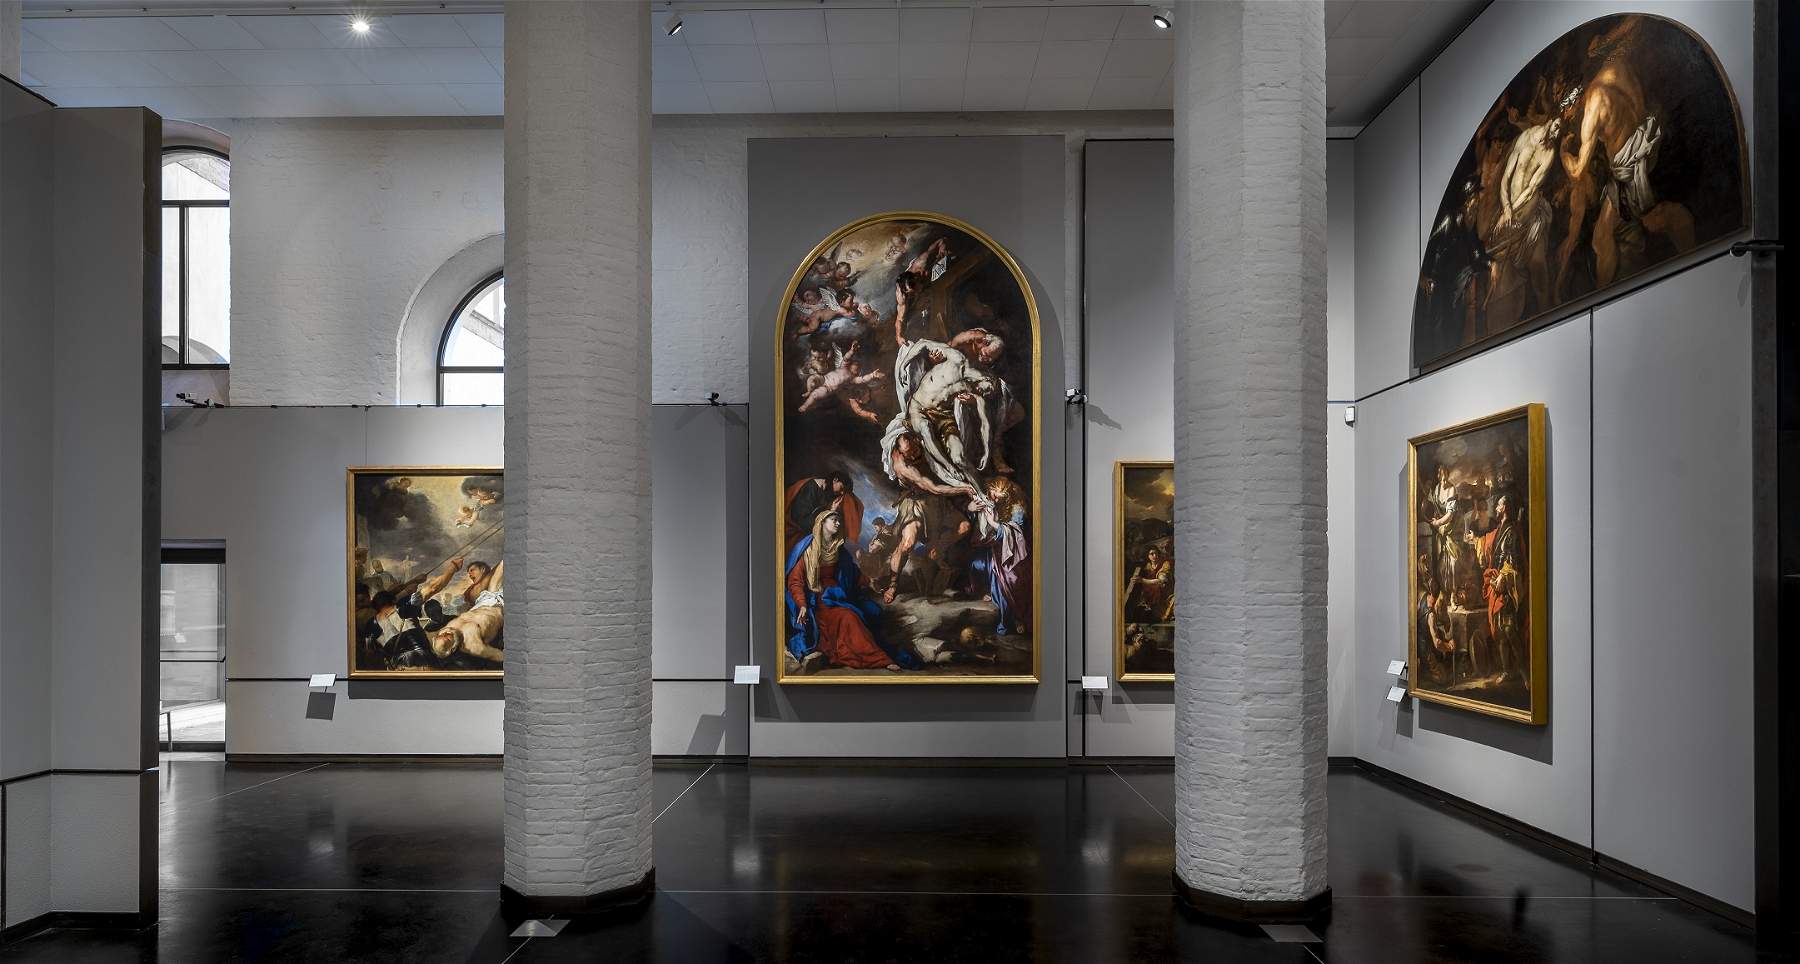 New rooms of the 17th and 18th centuries opened at the Gallerie dell'Accademia in Venice